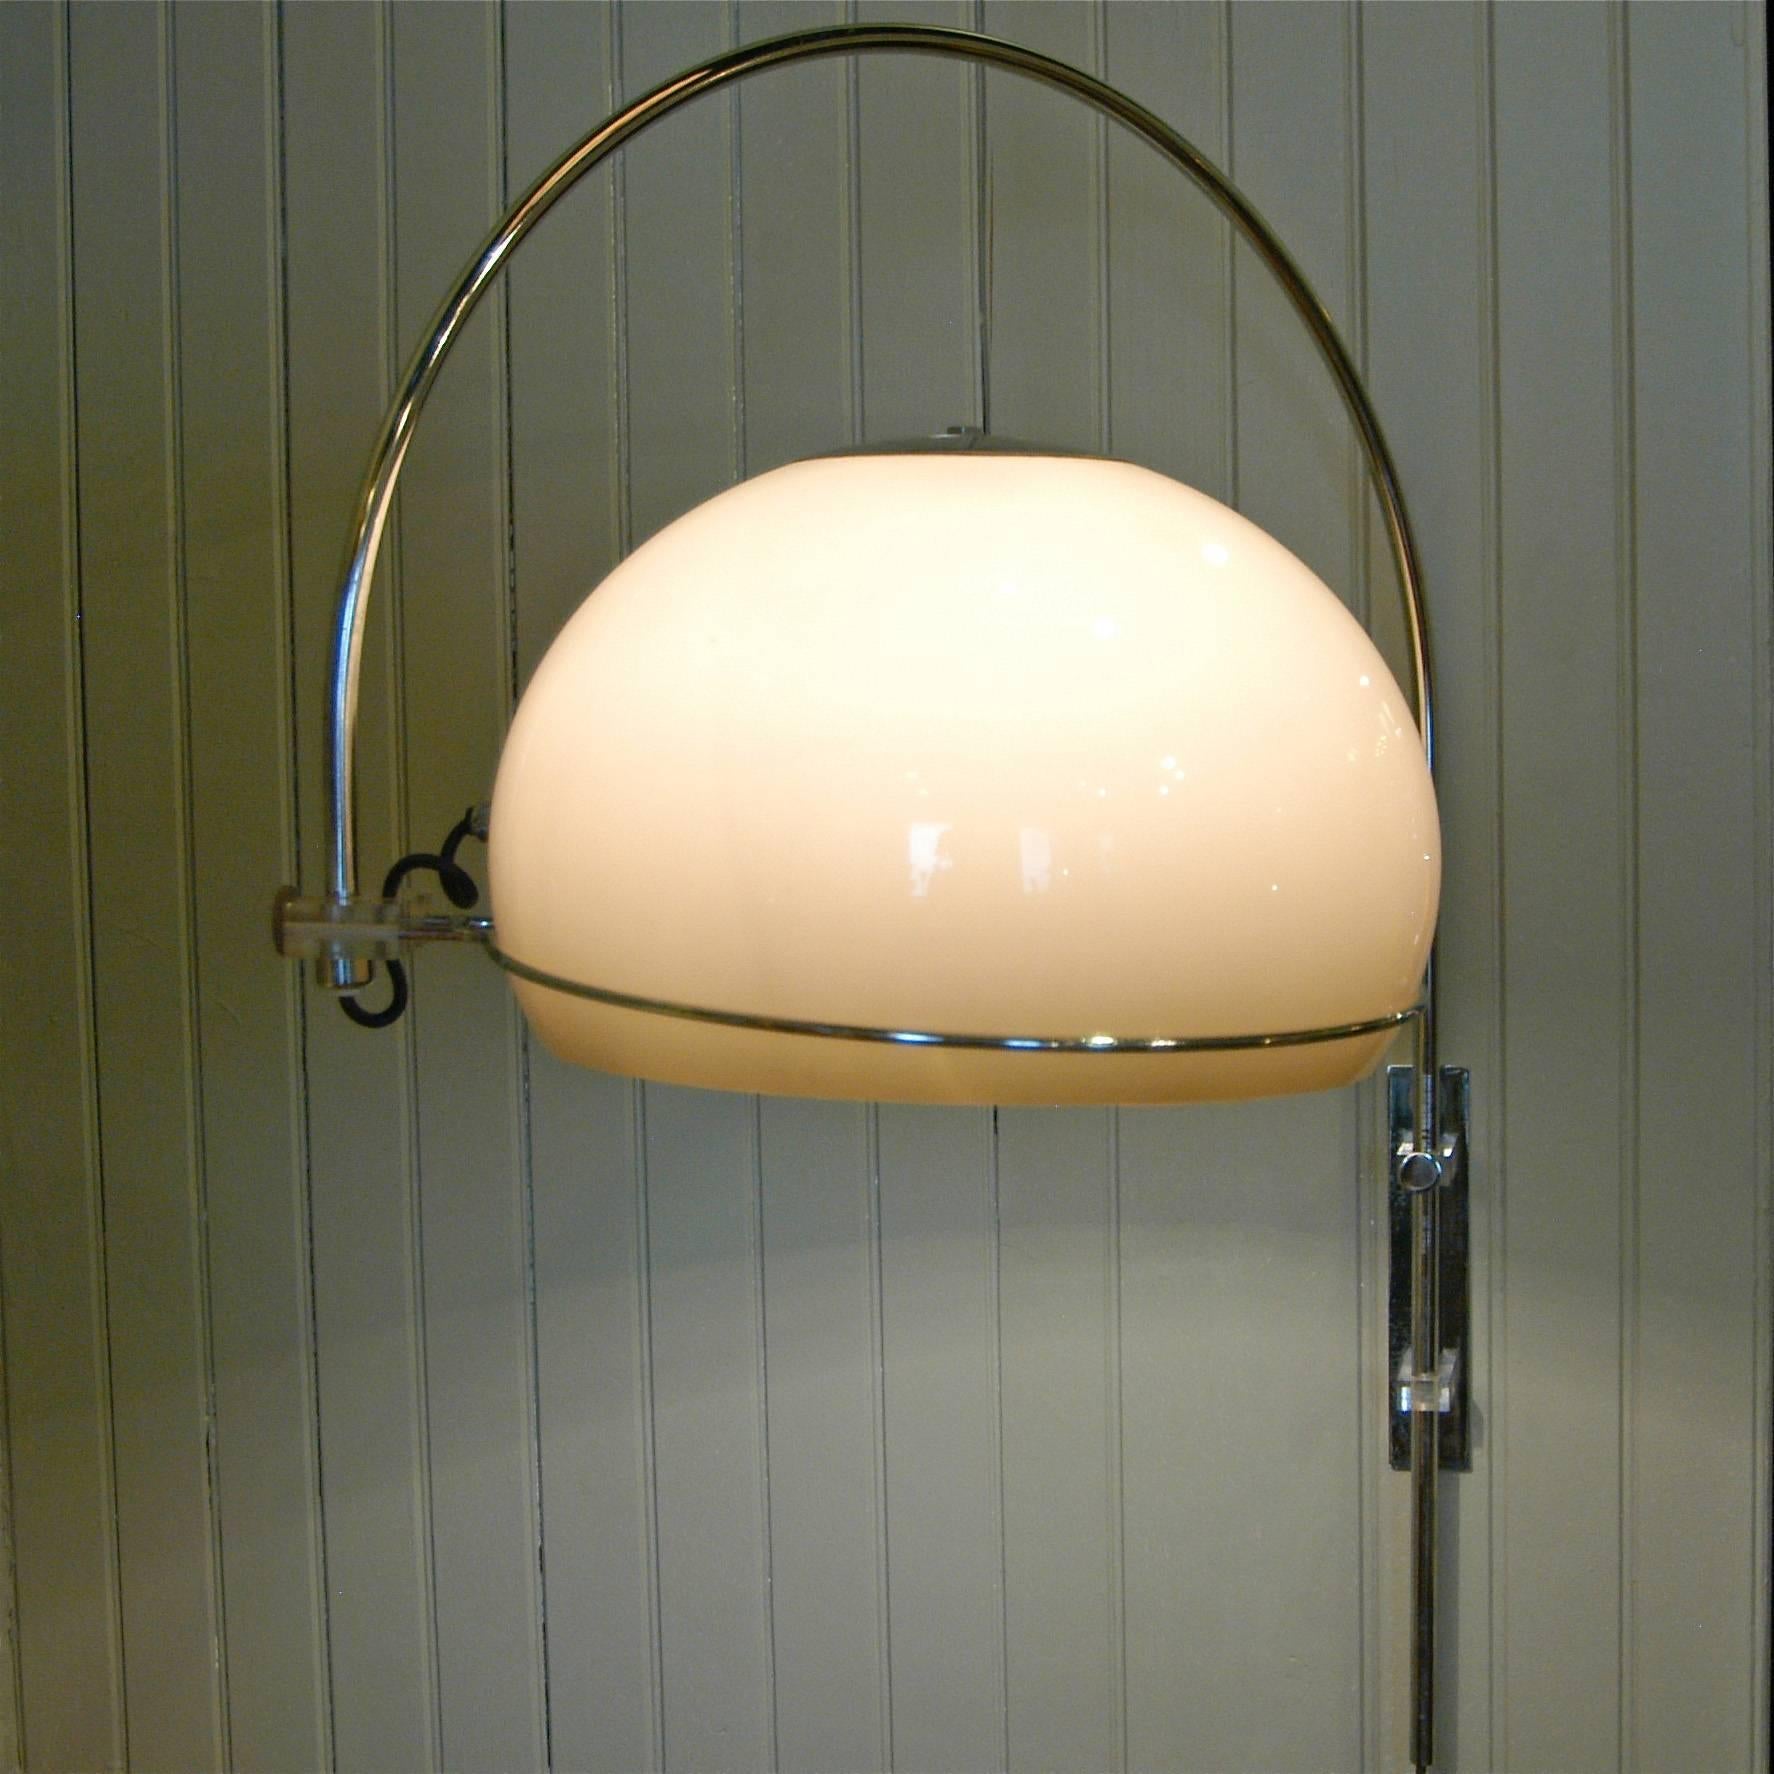 Plated Eyeball High Arc Sconce Lamp by Gebroeders Posthuma for Gepo